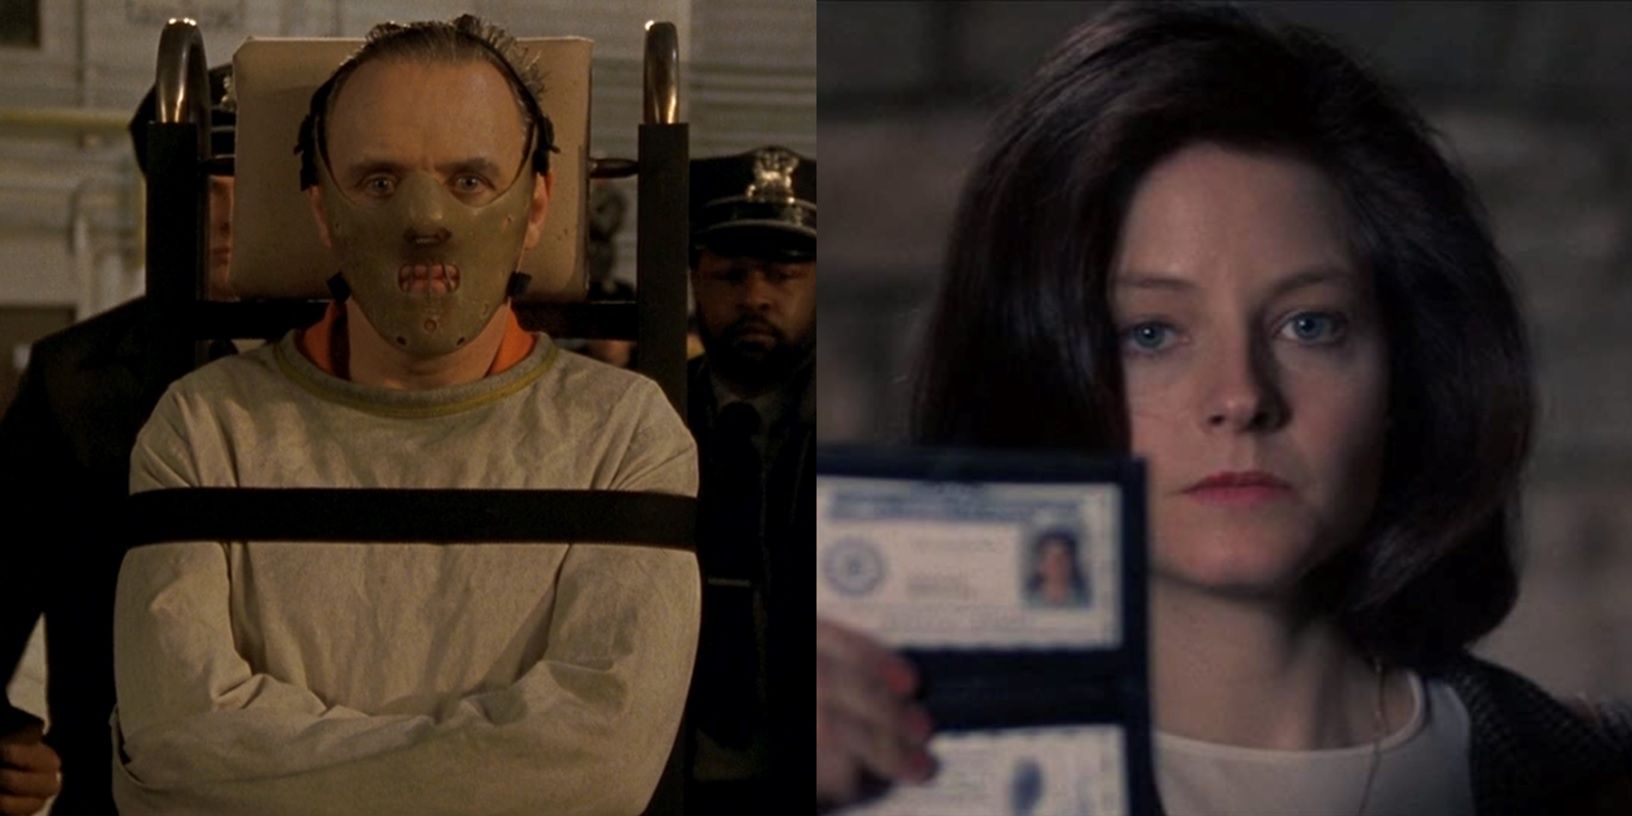 Hannibal Lecter in a straitjacket and Clarice Starling showing her FBI badge in The Silence of the Lambs